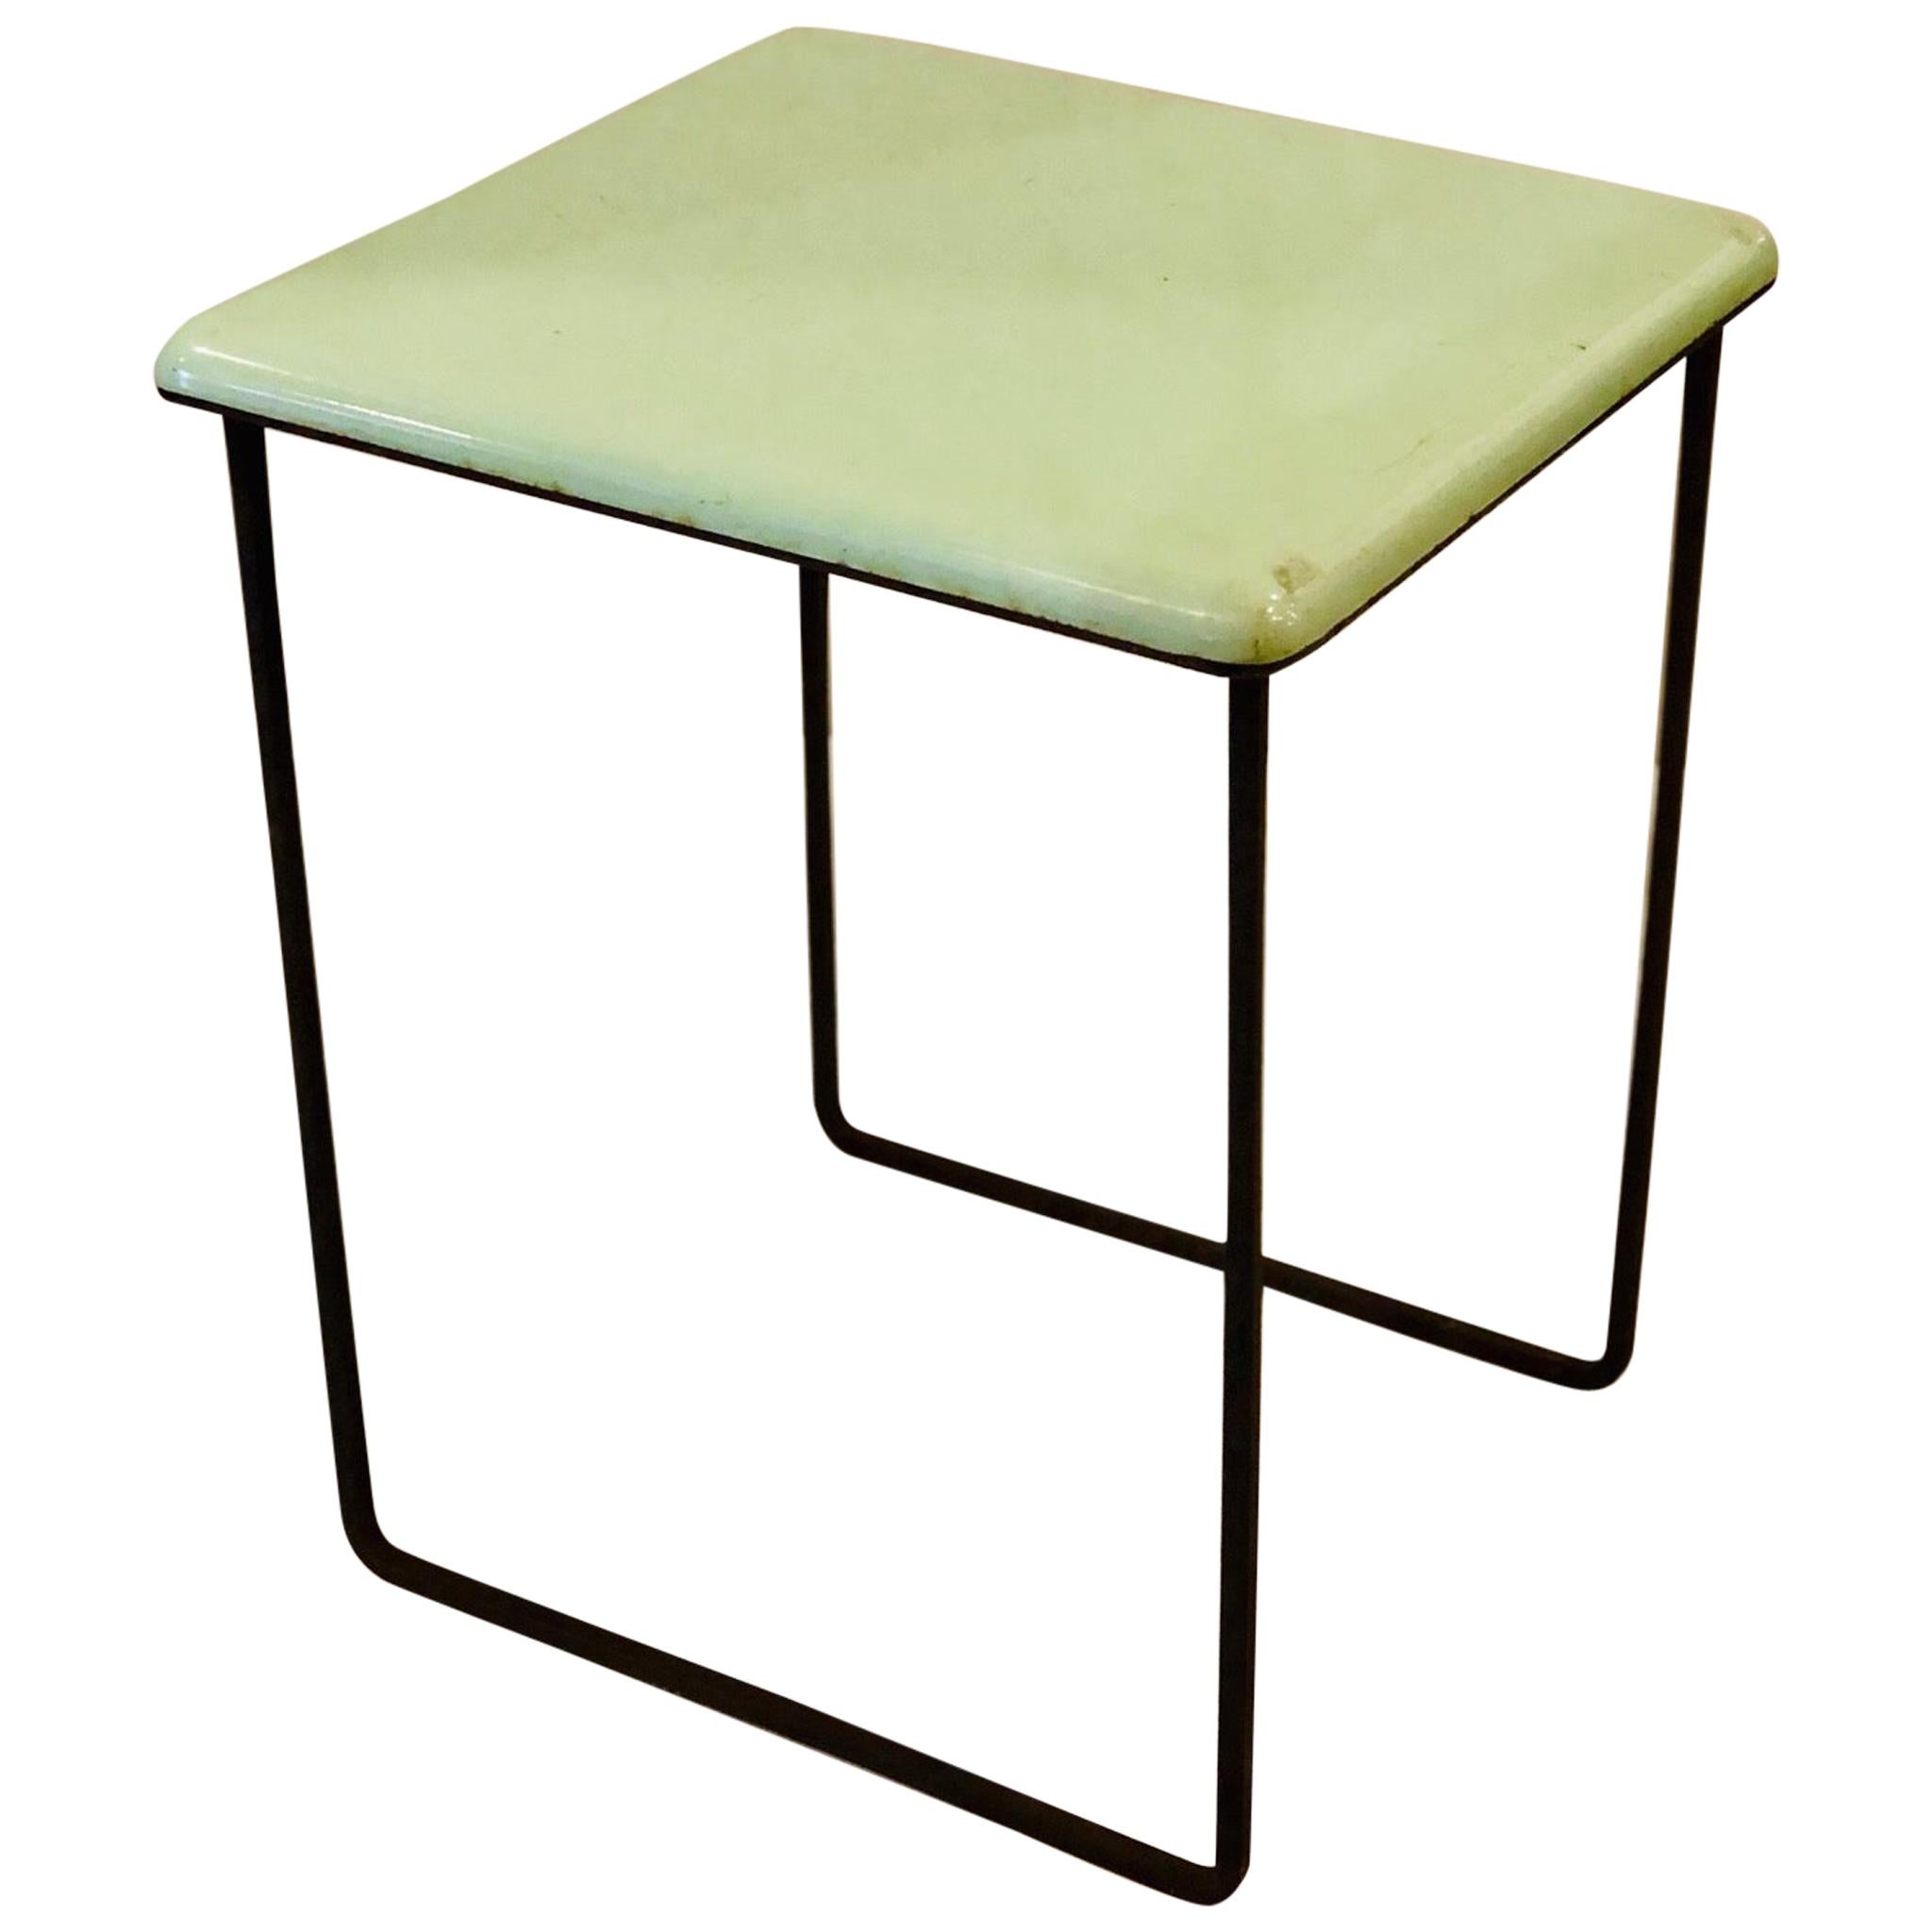 Petite Enameled Top Atomic Age Table with Iron Base